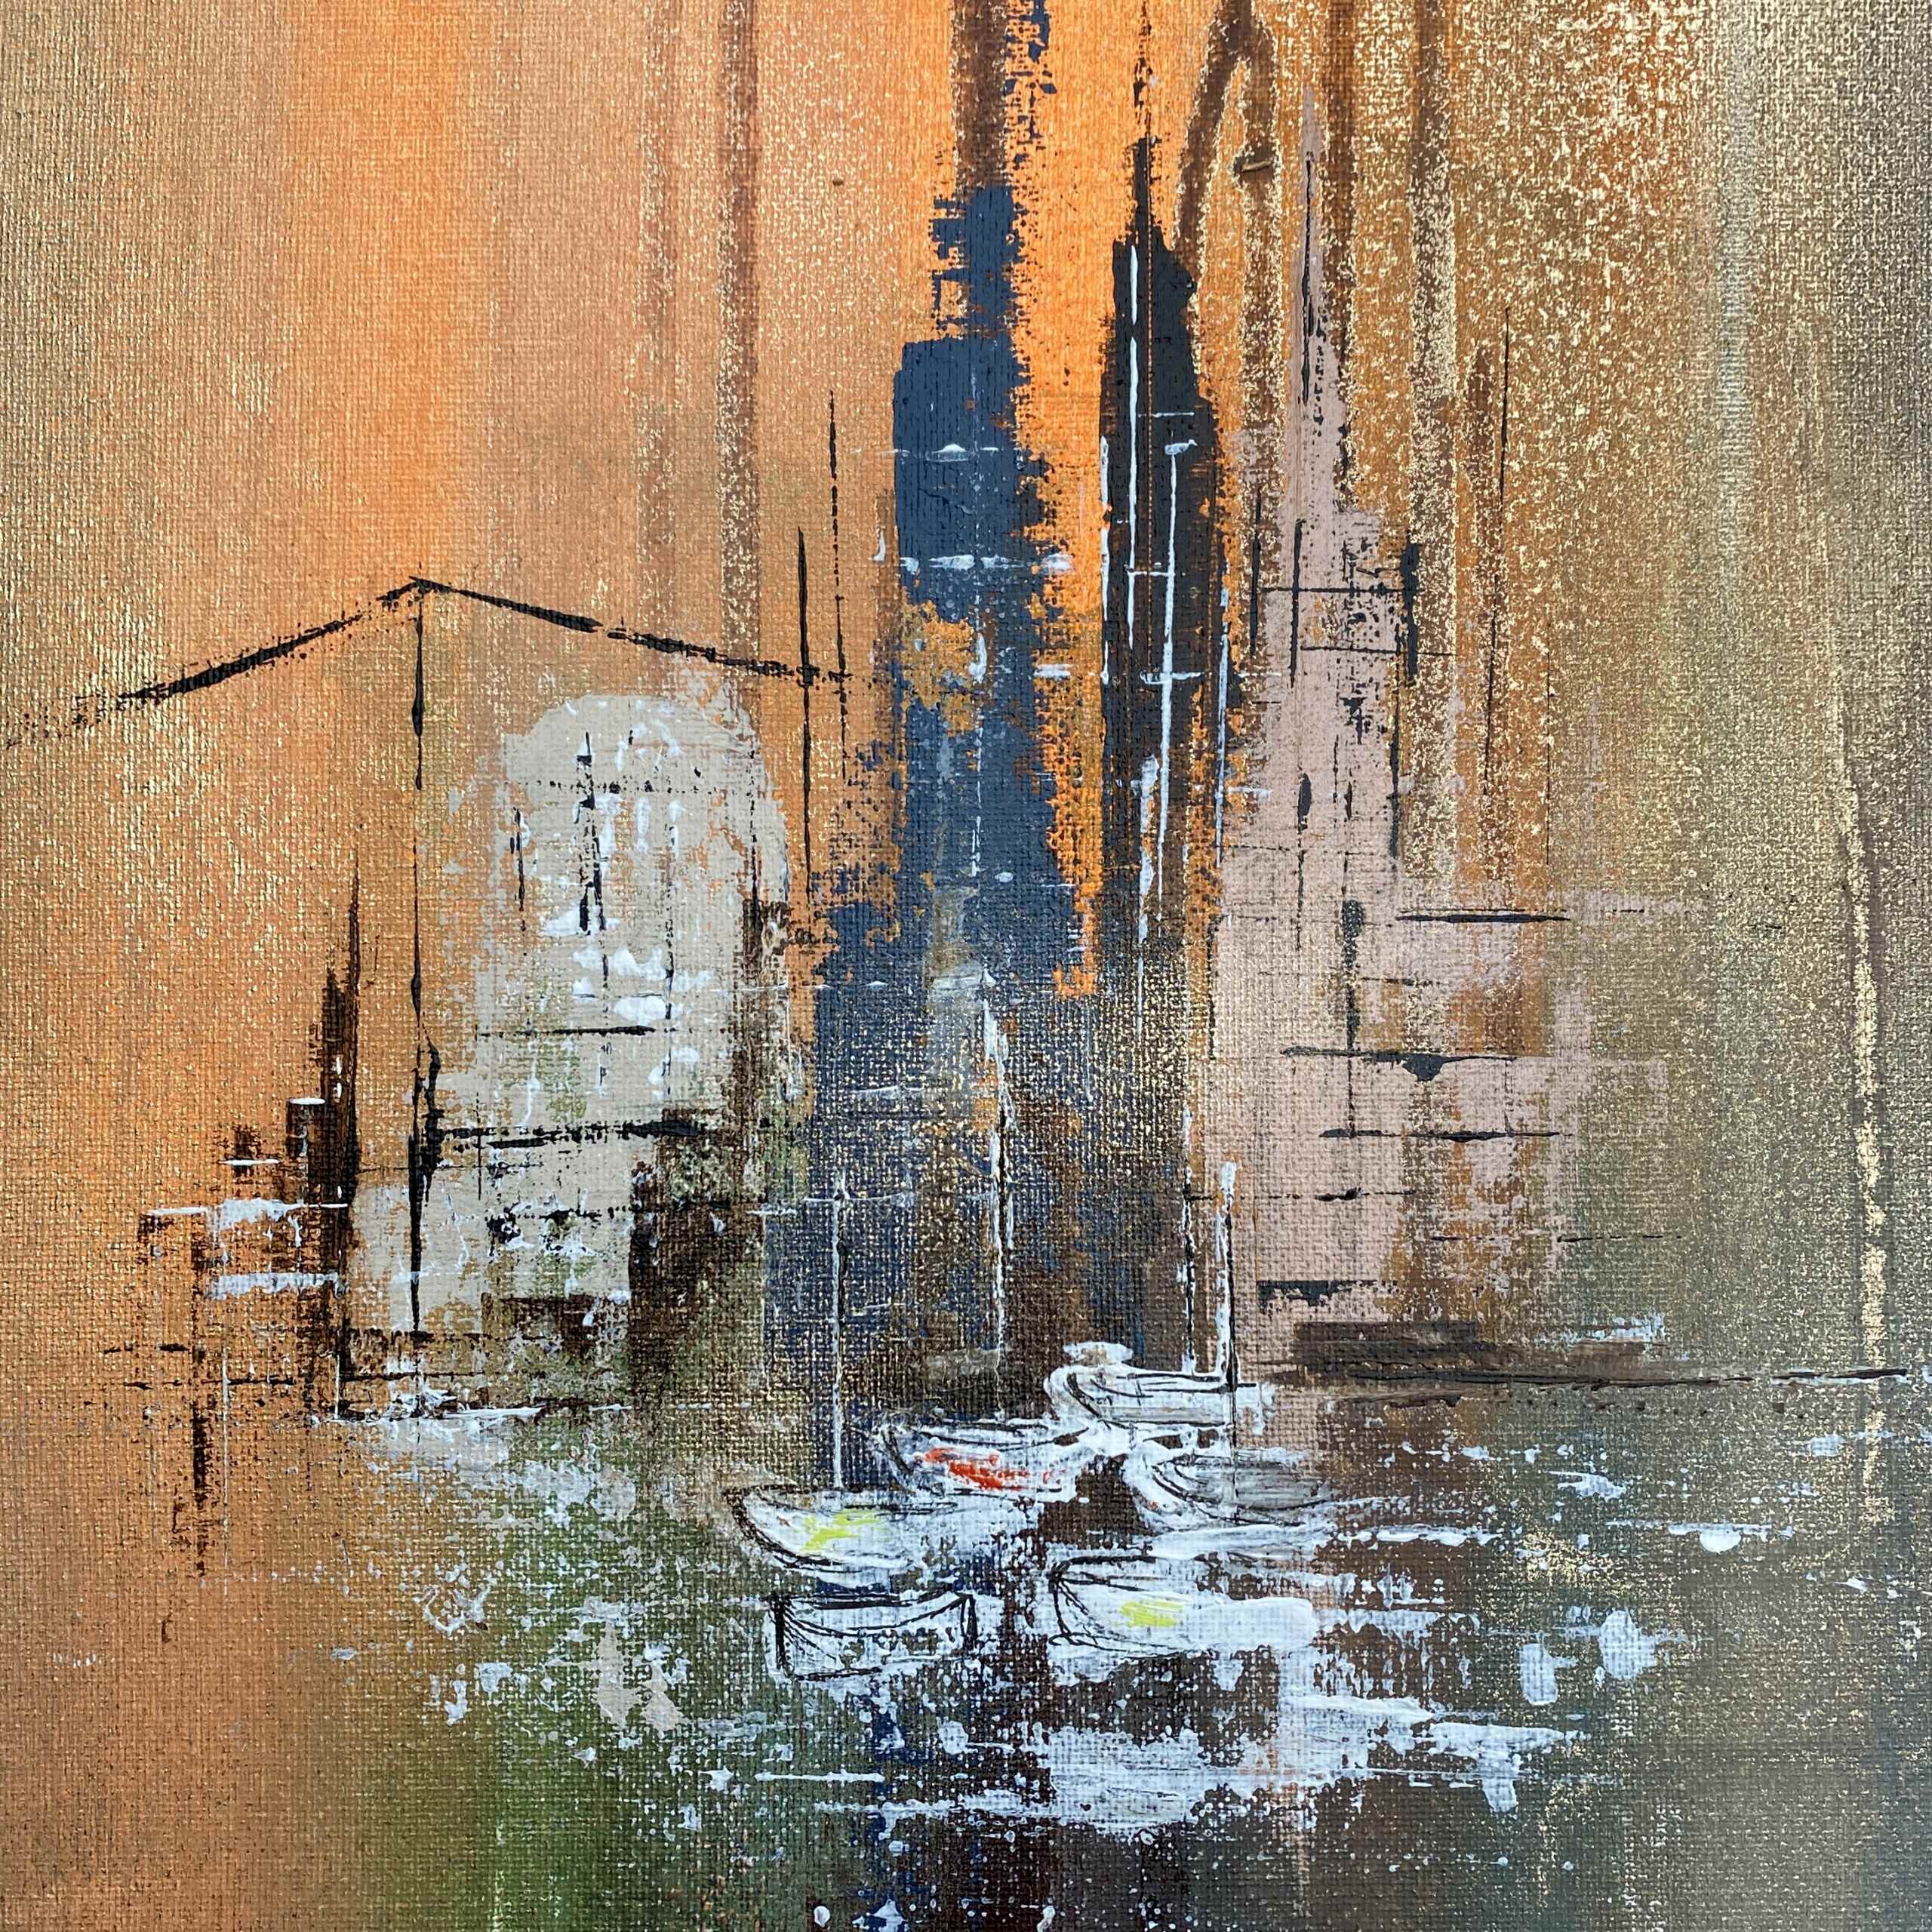 Detail of artwork "Lights of the City No 1" by Nina Groth